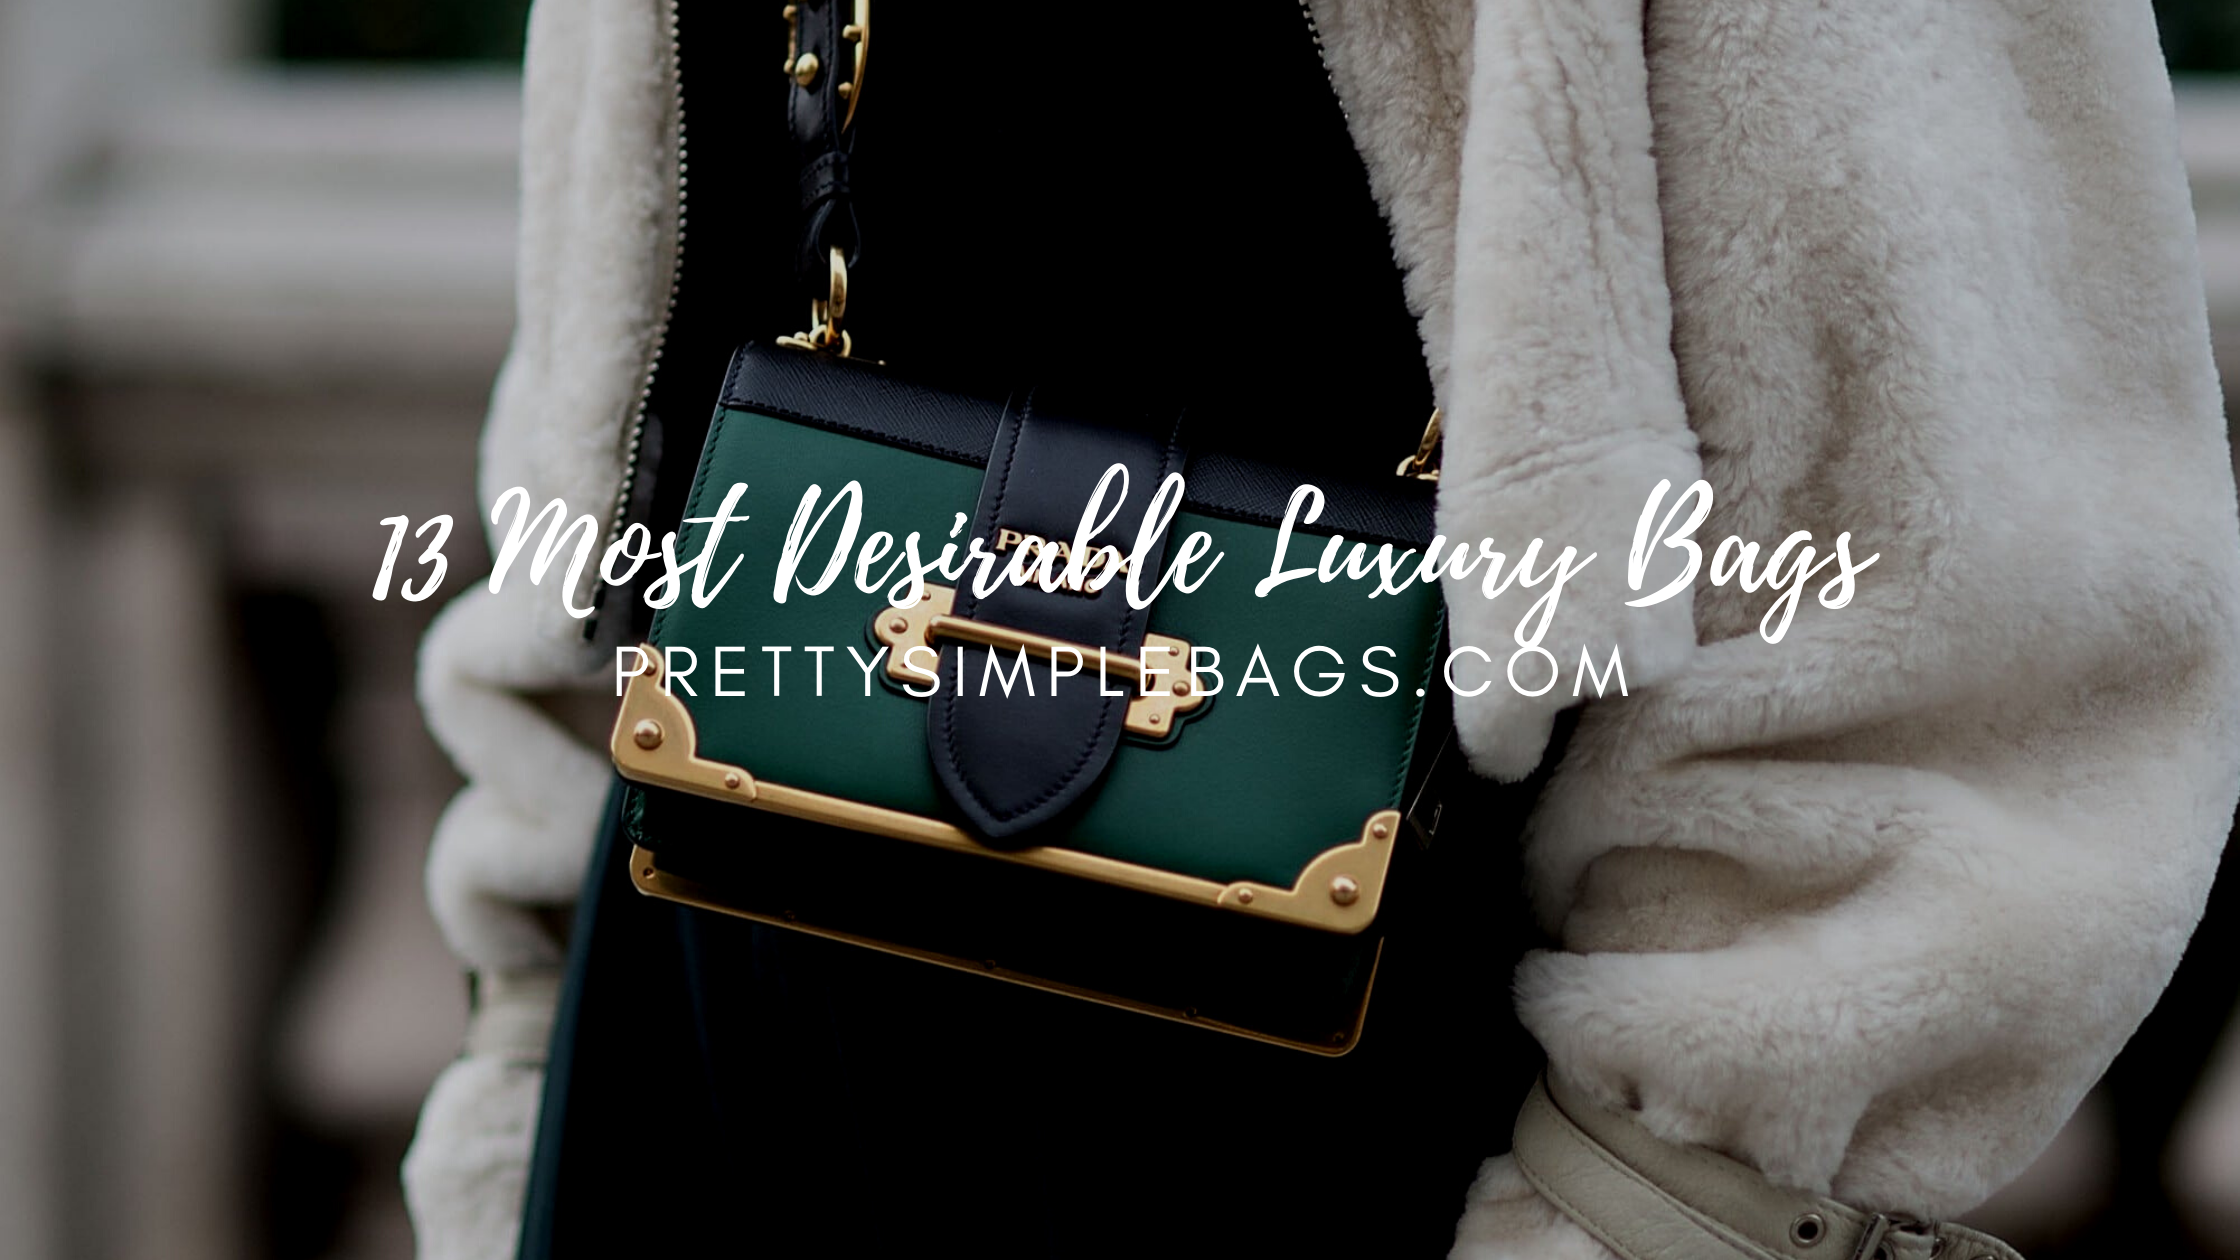 13 Most Desirable Luxury Bags